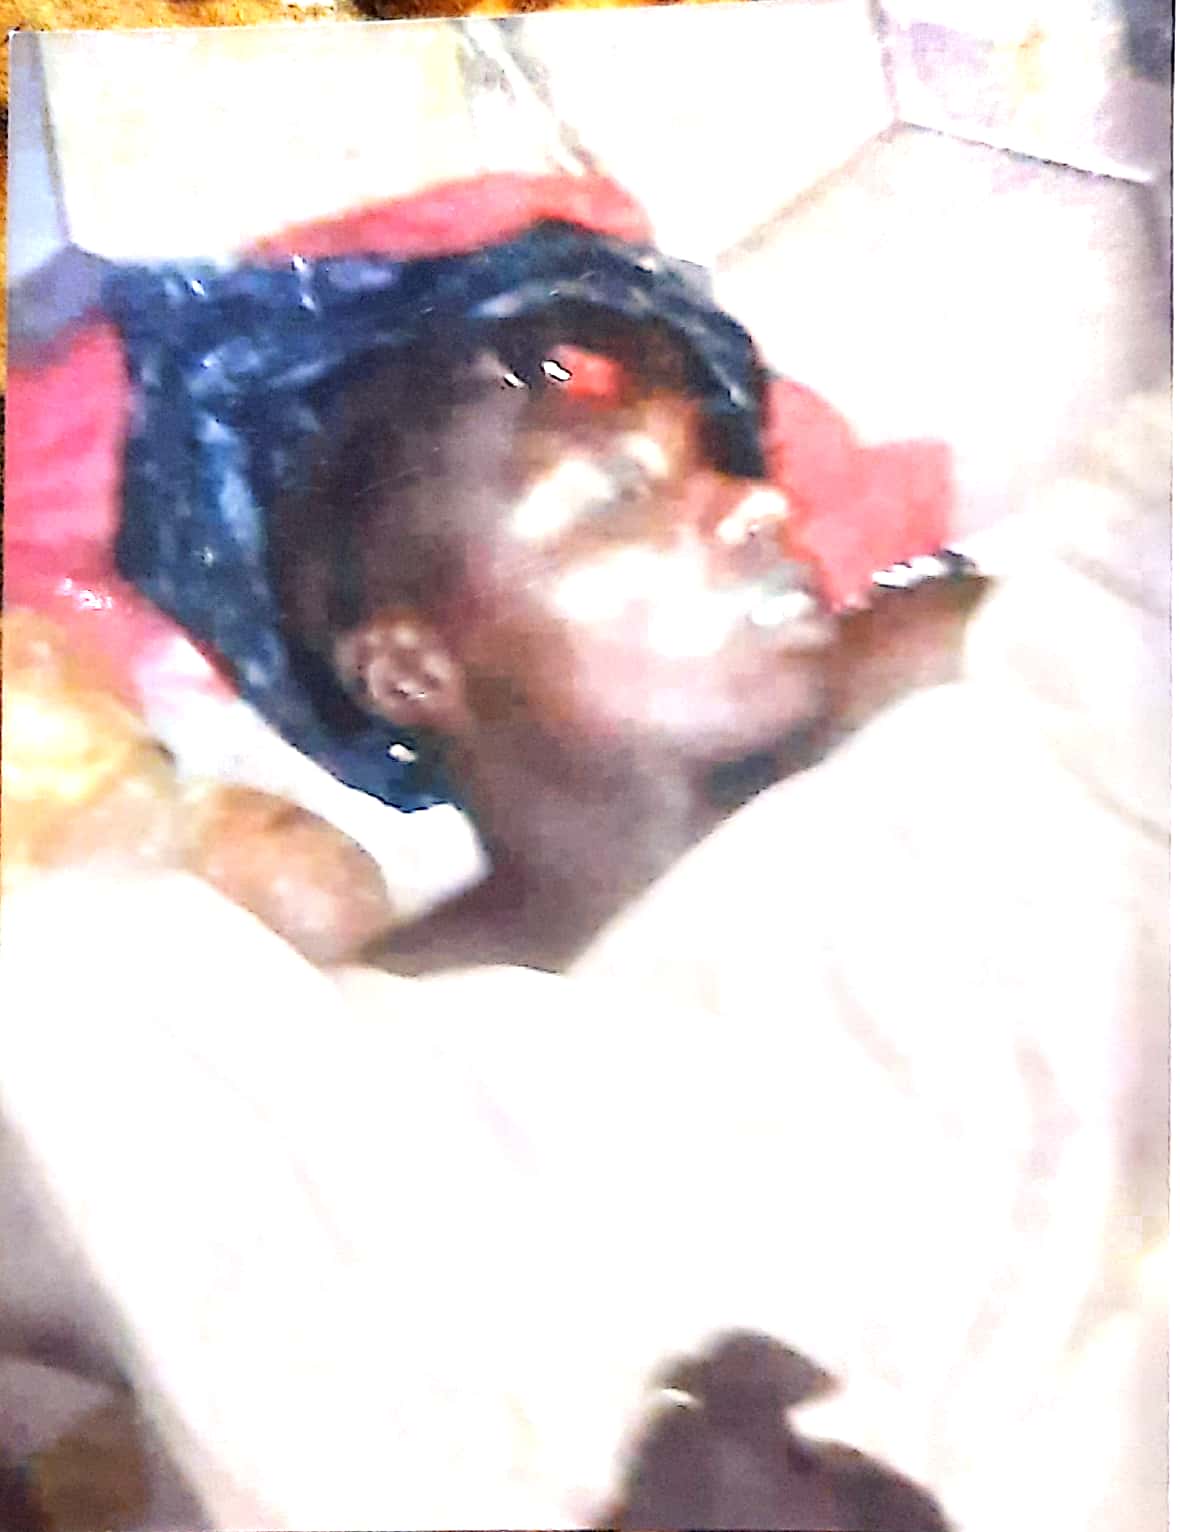 Sani Umar, with skull packed in a plastic bag